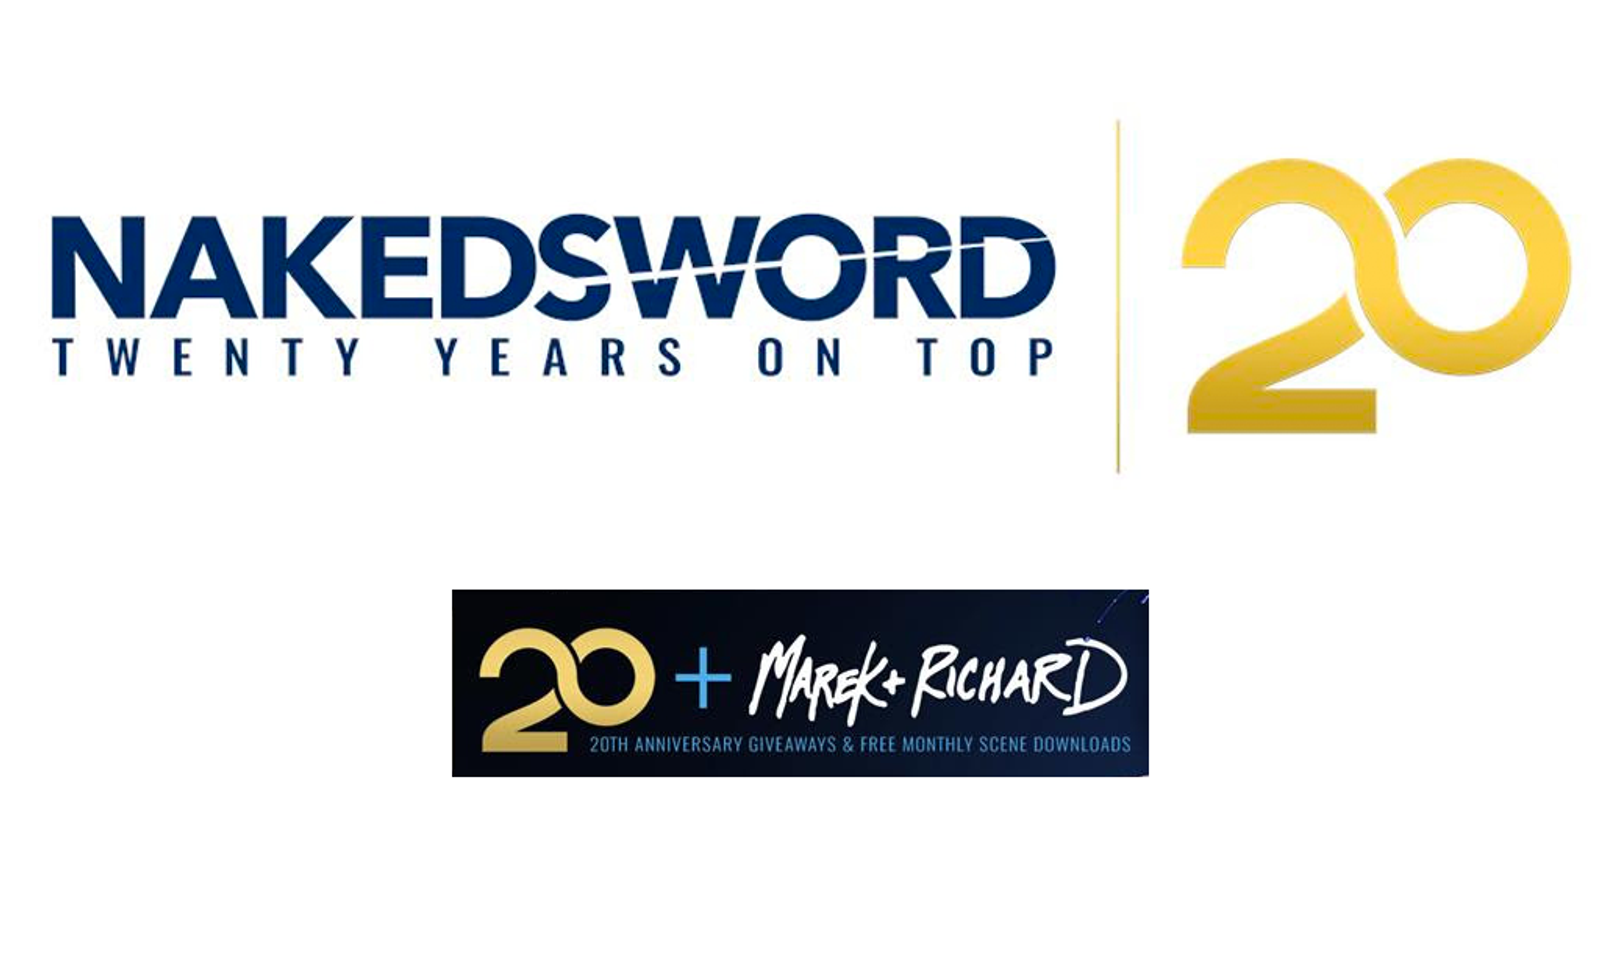 NakedSword Continues 20 Year Celebration With Gift Card Giveaway